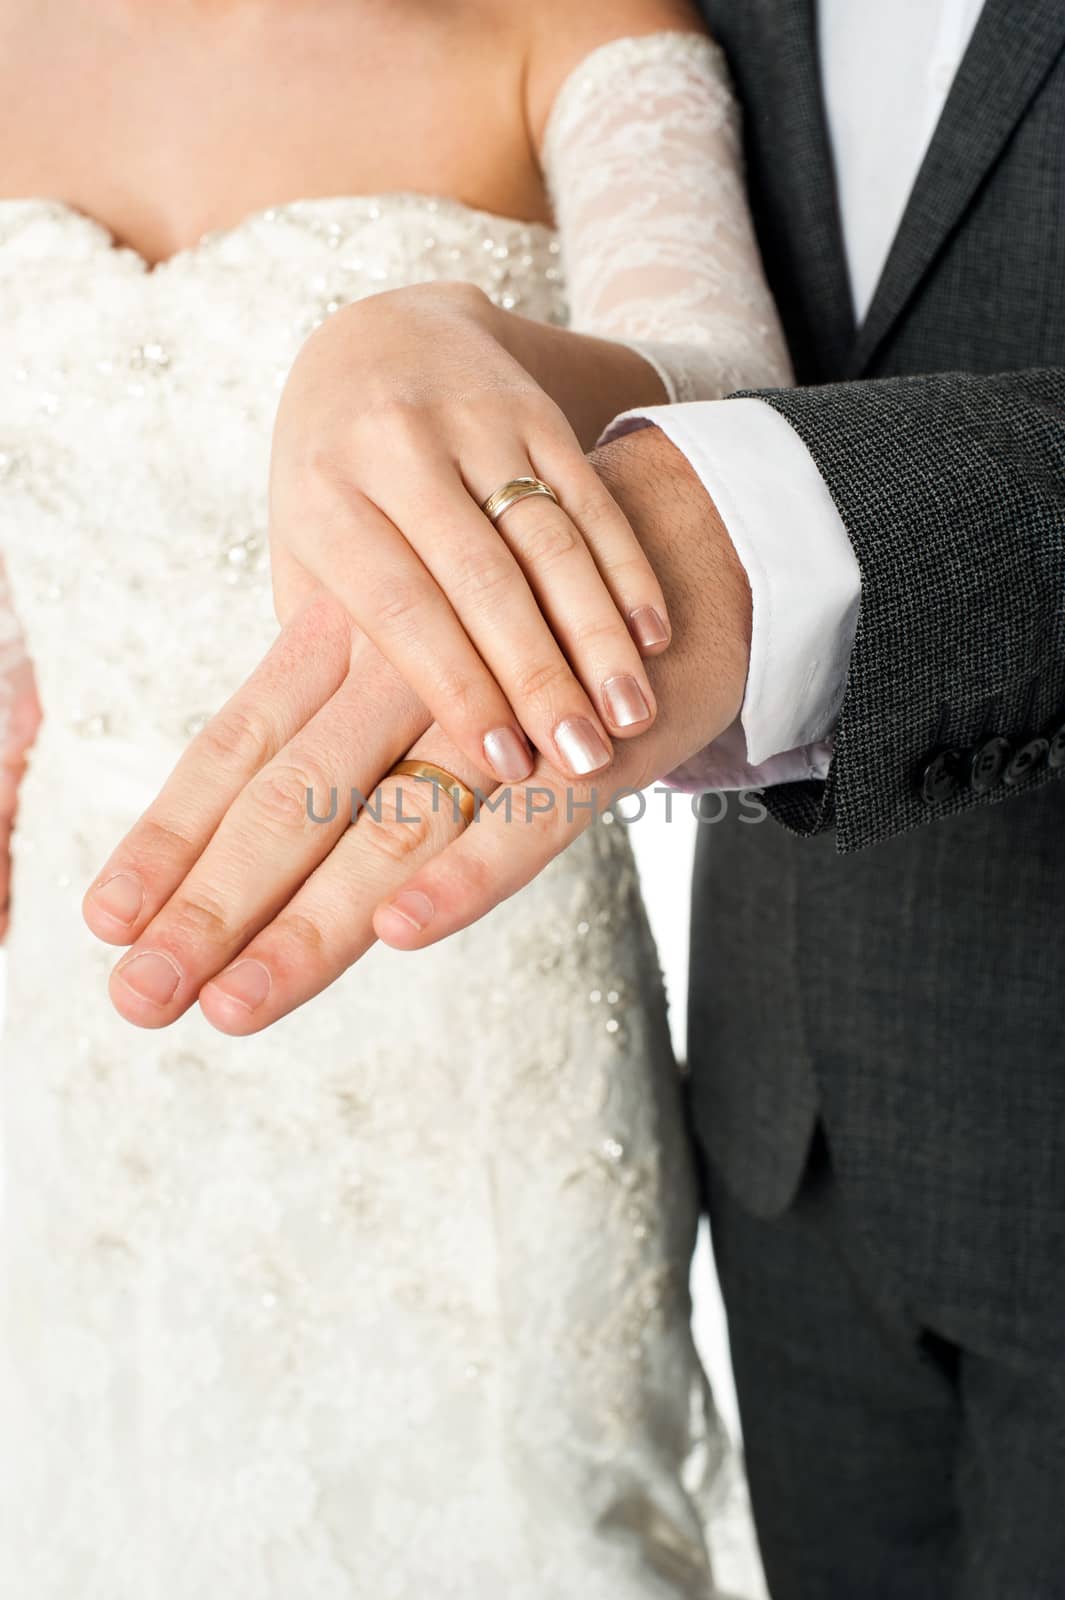 Couple showing their wedding bands by stockyimages